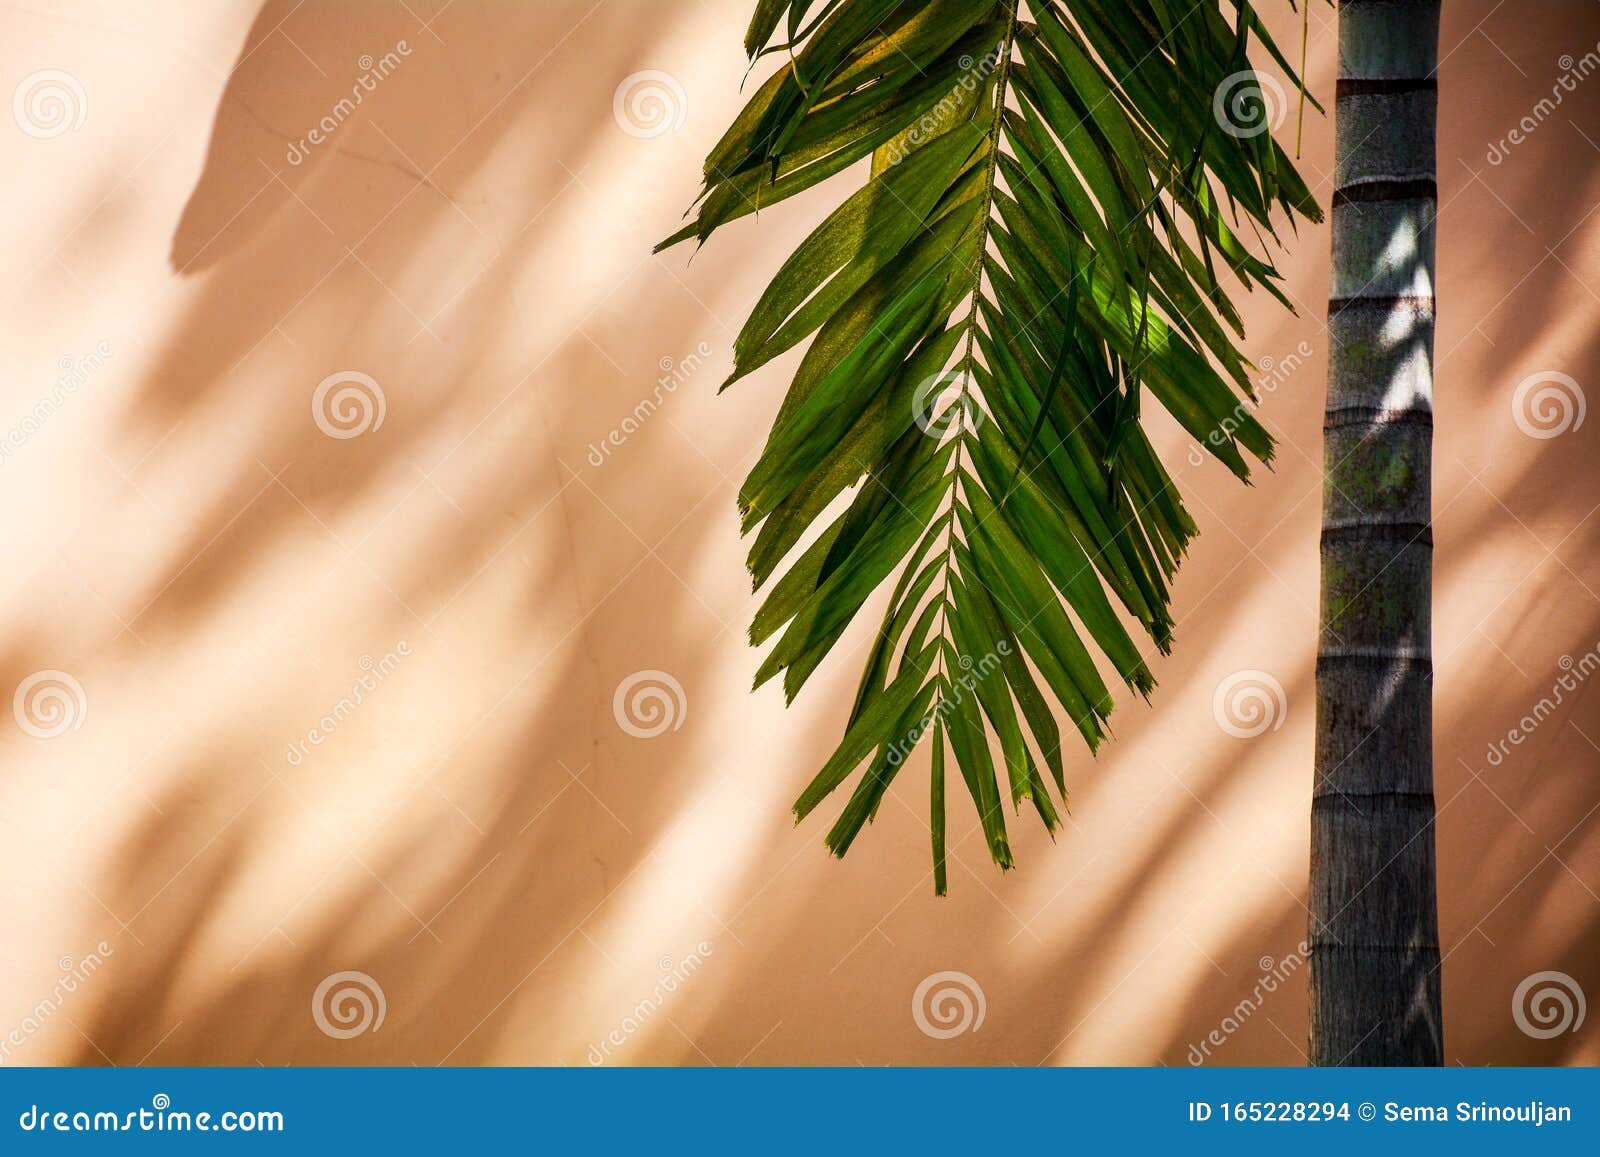 Palm Tree And Shadow On A Concrete Wall. Stock Photo - Image of